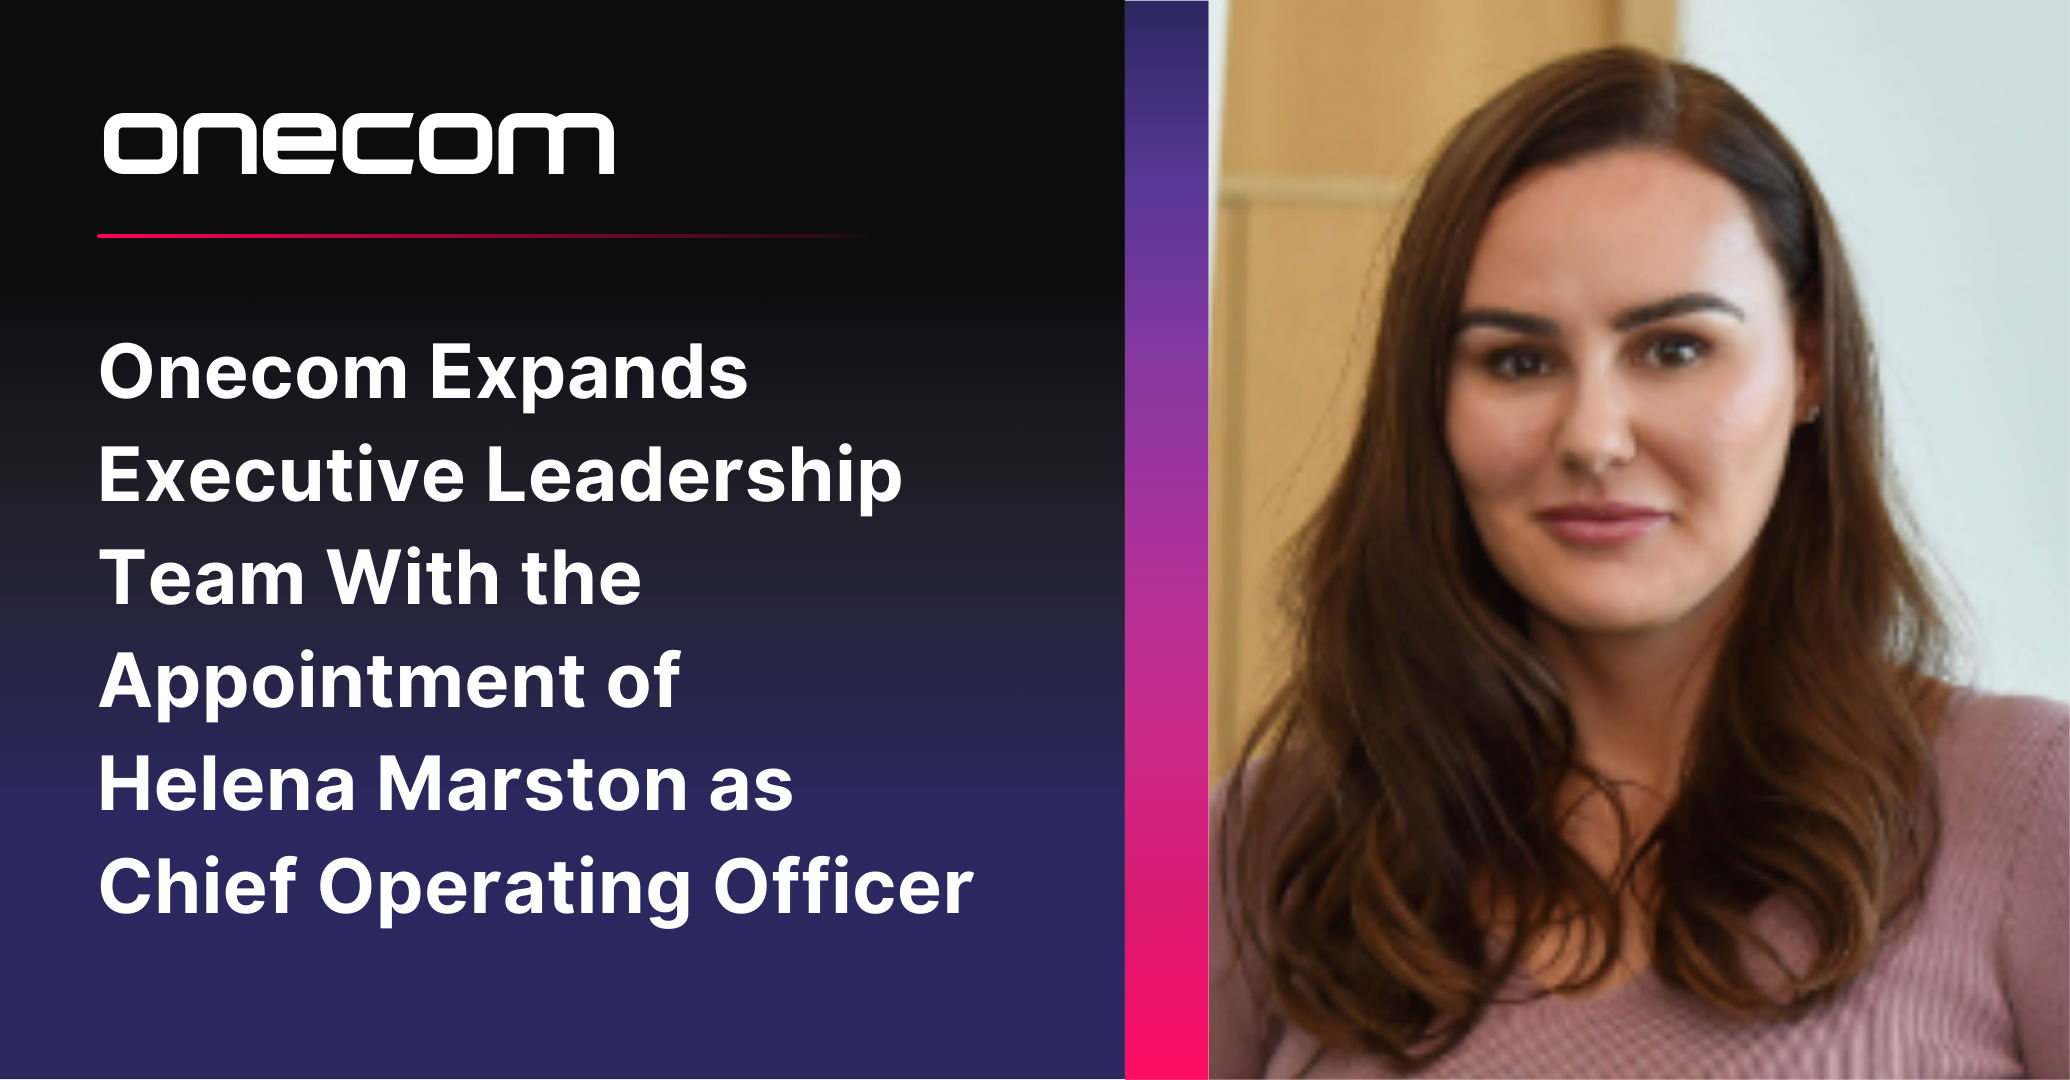 Onecom Expands Executive Leadership Team With the Appointment of Helena Marston as Chief Operating Officer